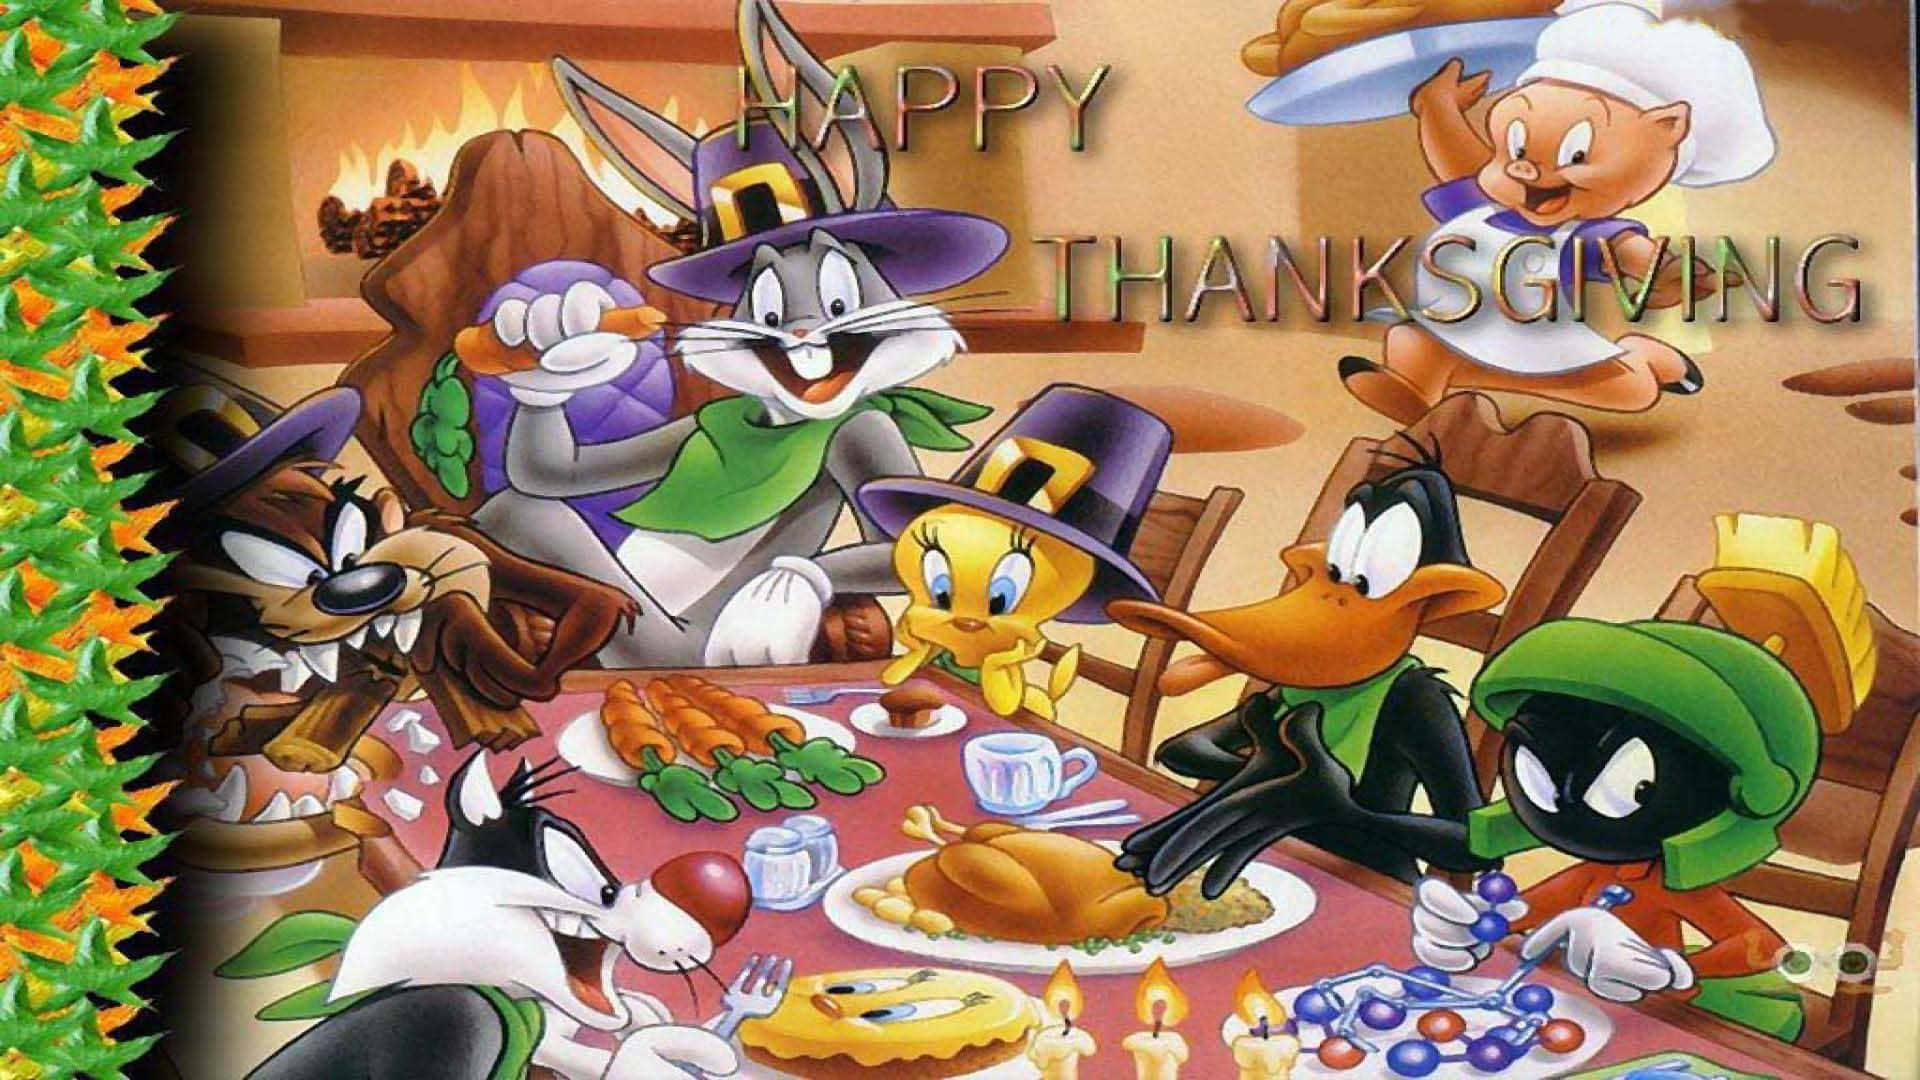 Looney Tunes Characters Anime Thanksgiving Wallpaper